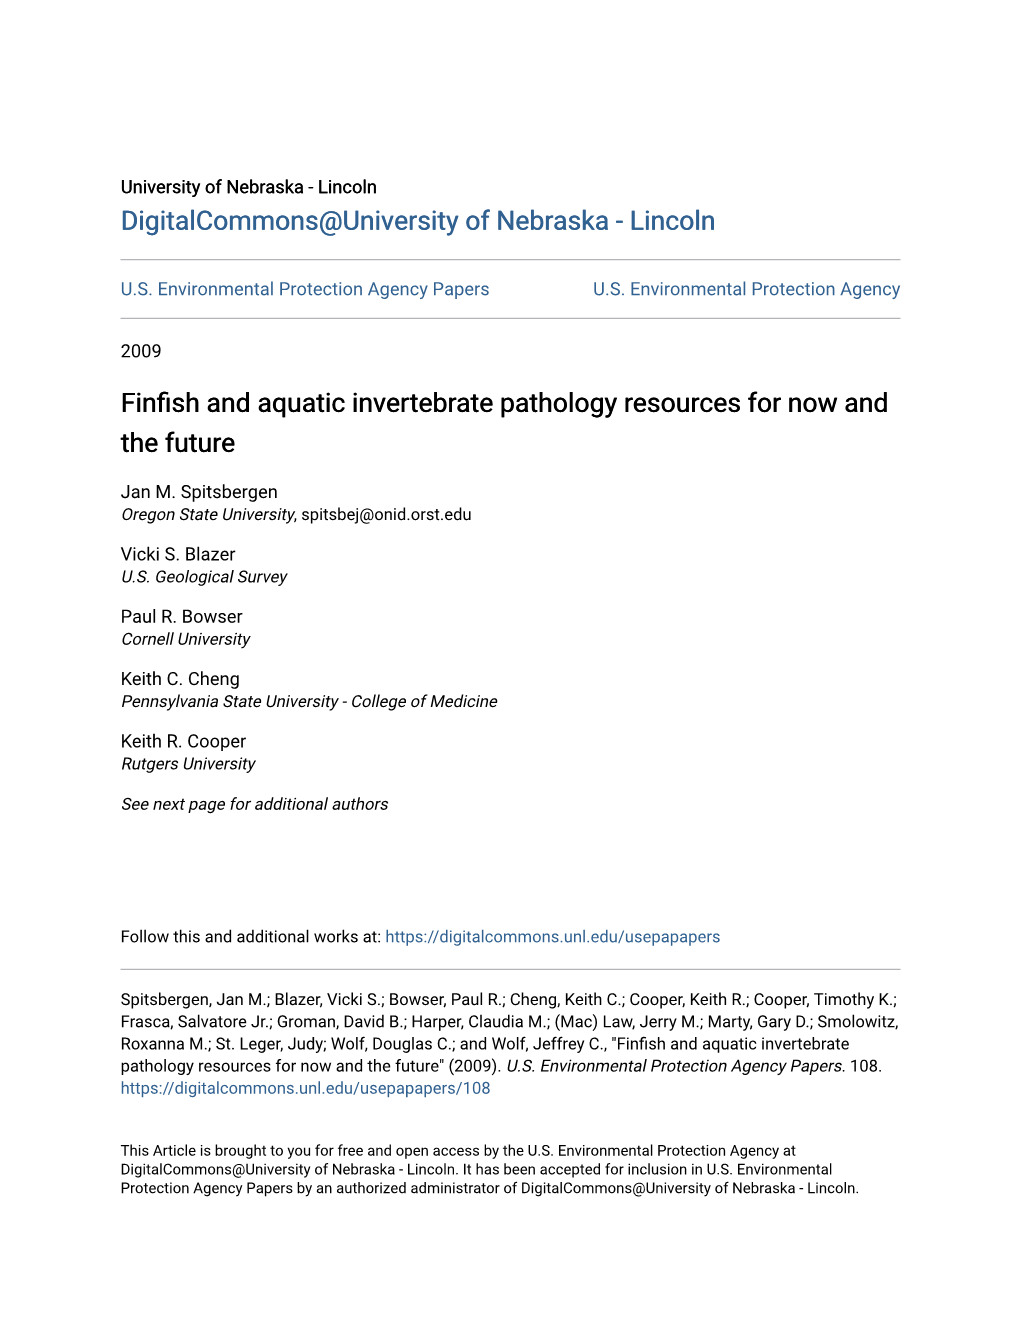 Finfish and Aquatic Invertebrate Pathology Resources for Now and the Future